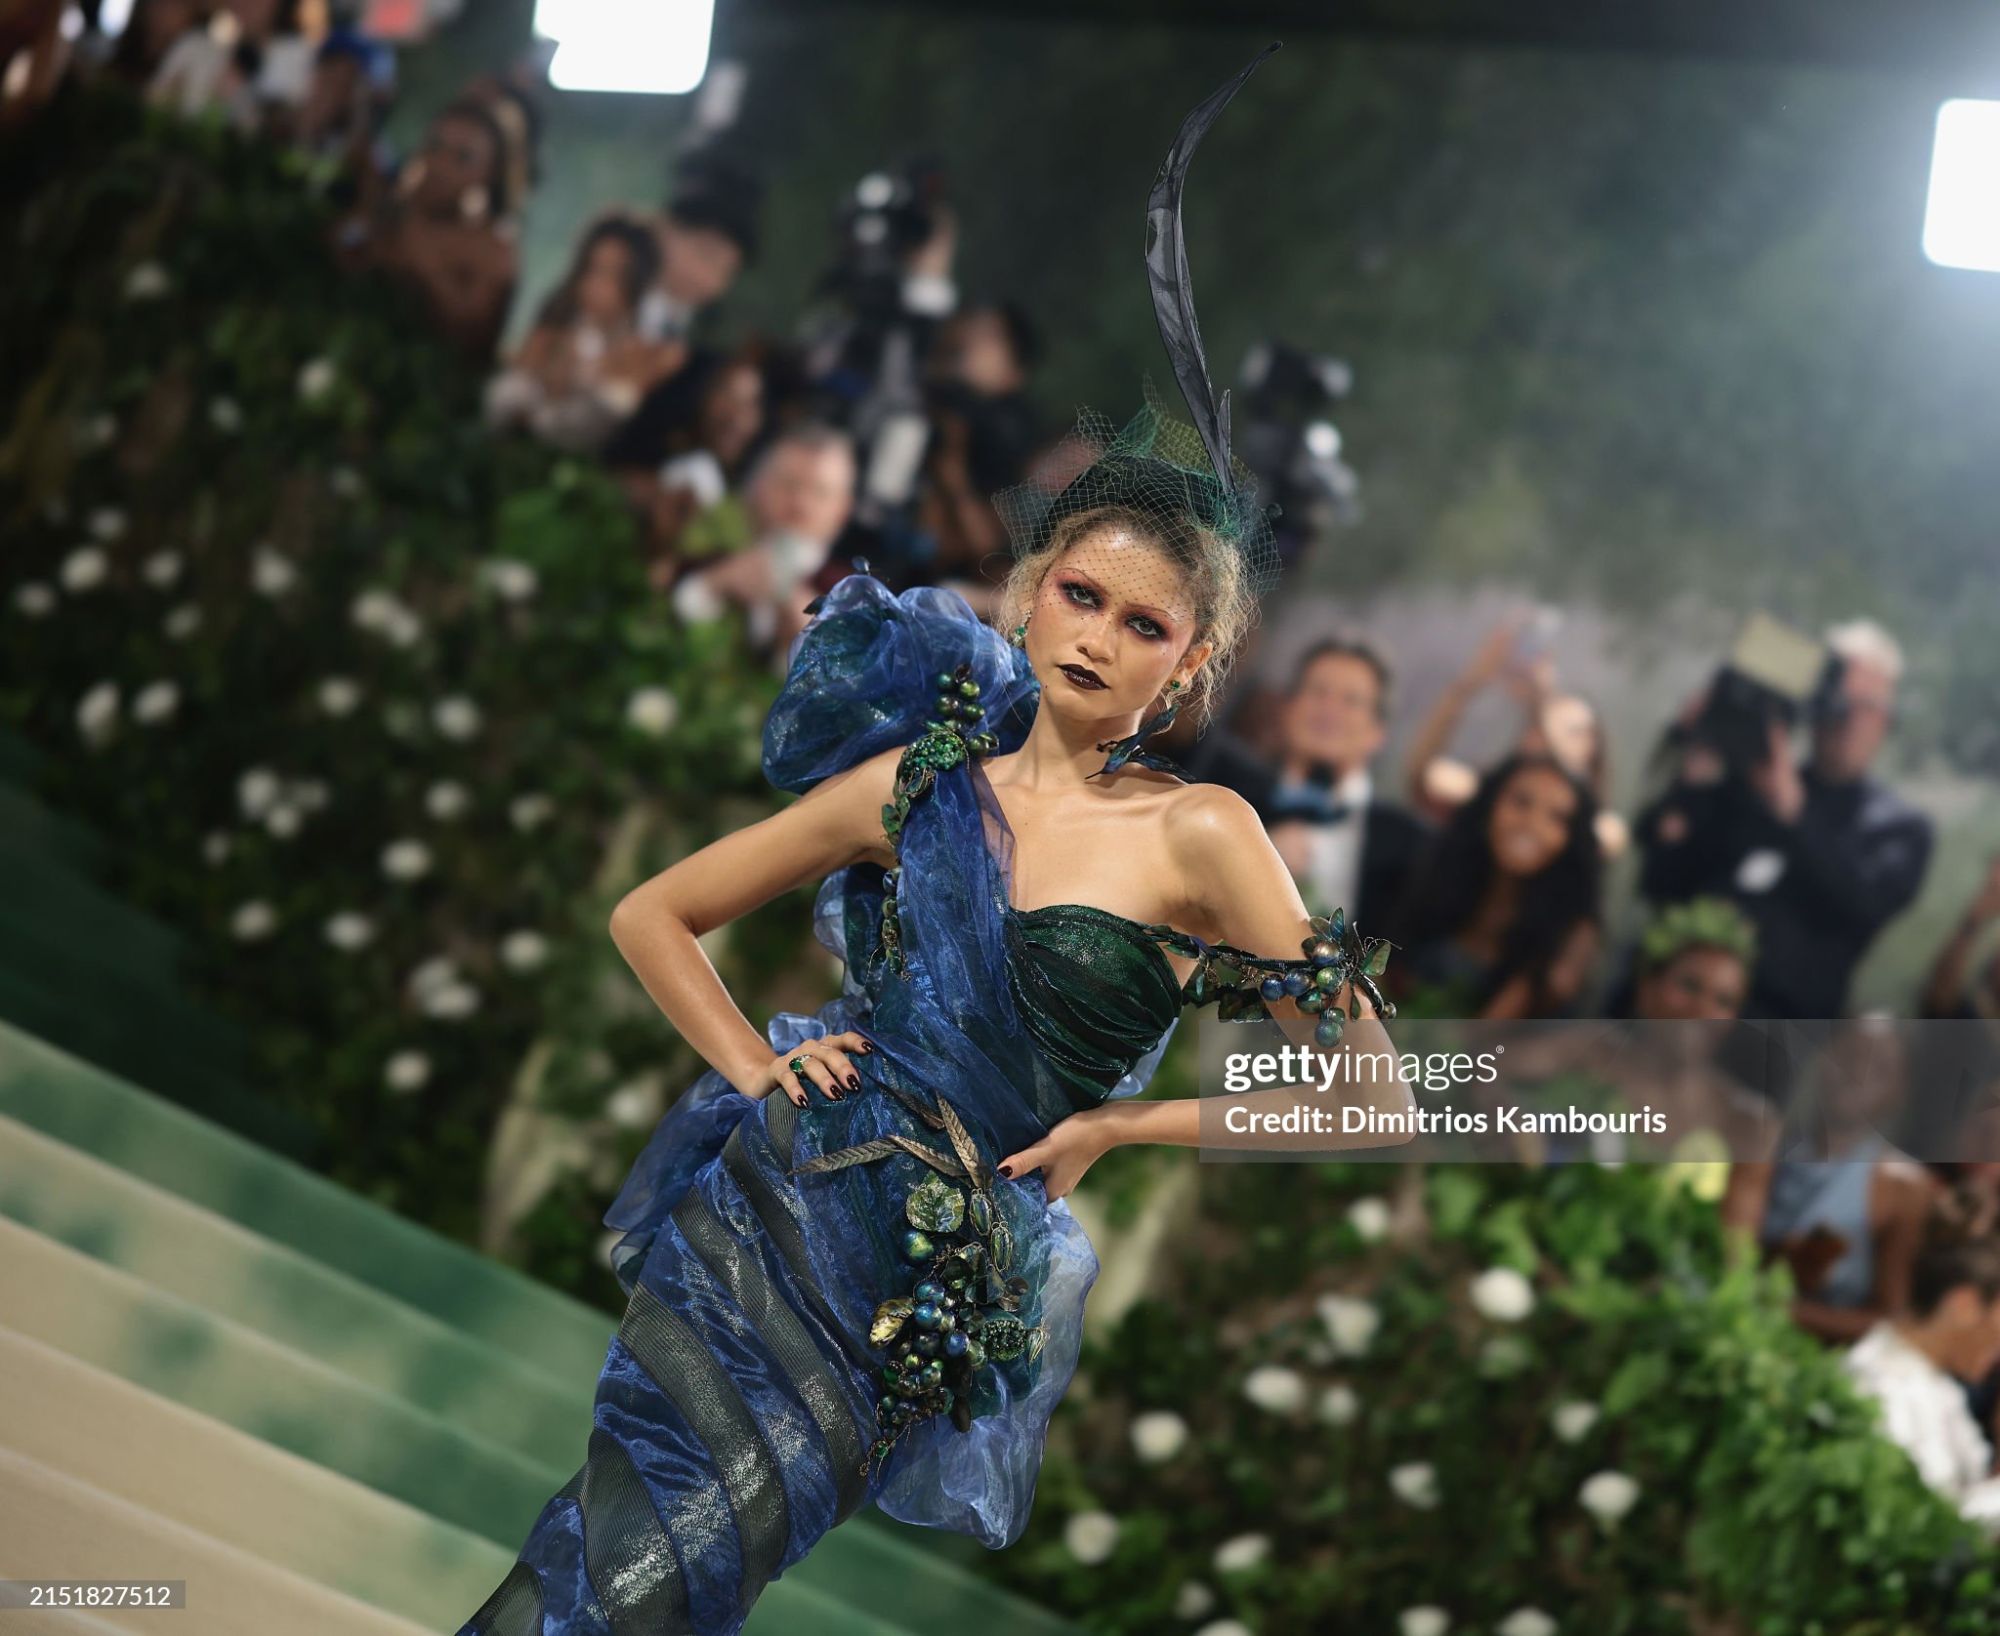 gettyimages-2151827512-2048x2048.jpg